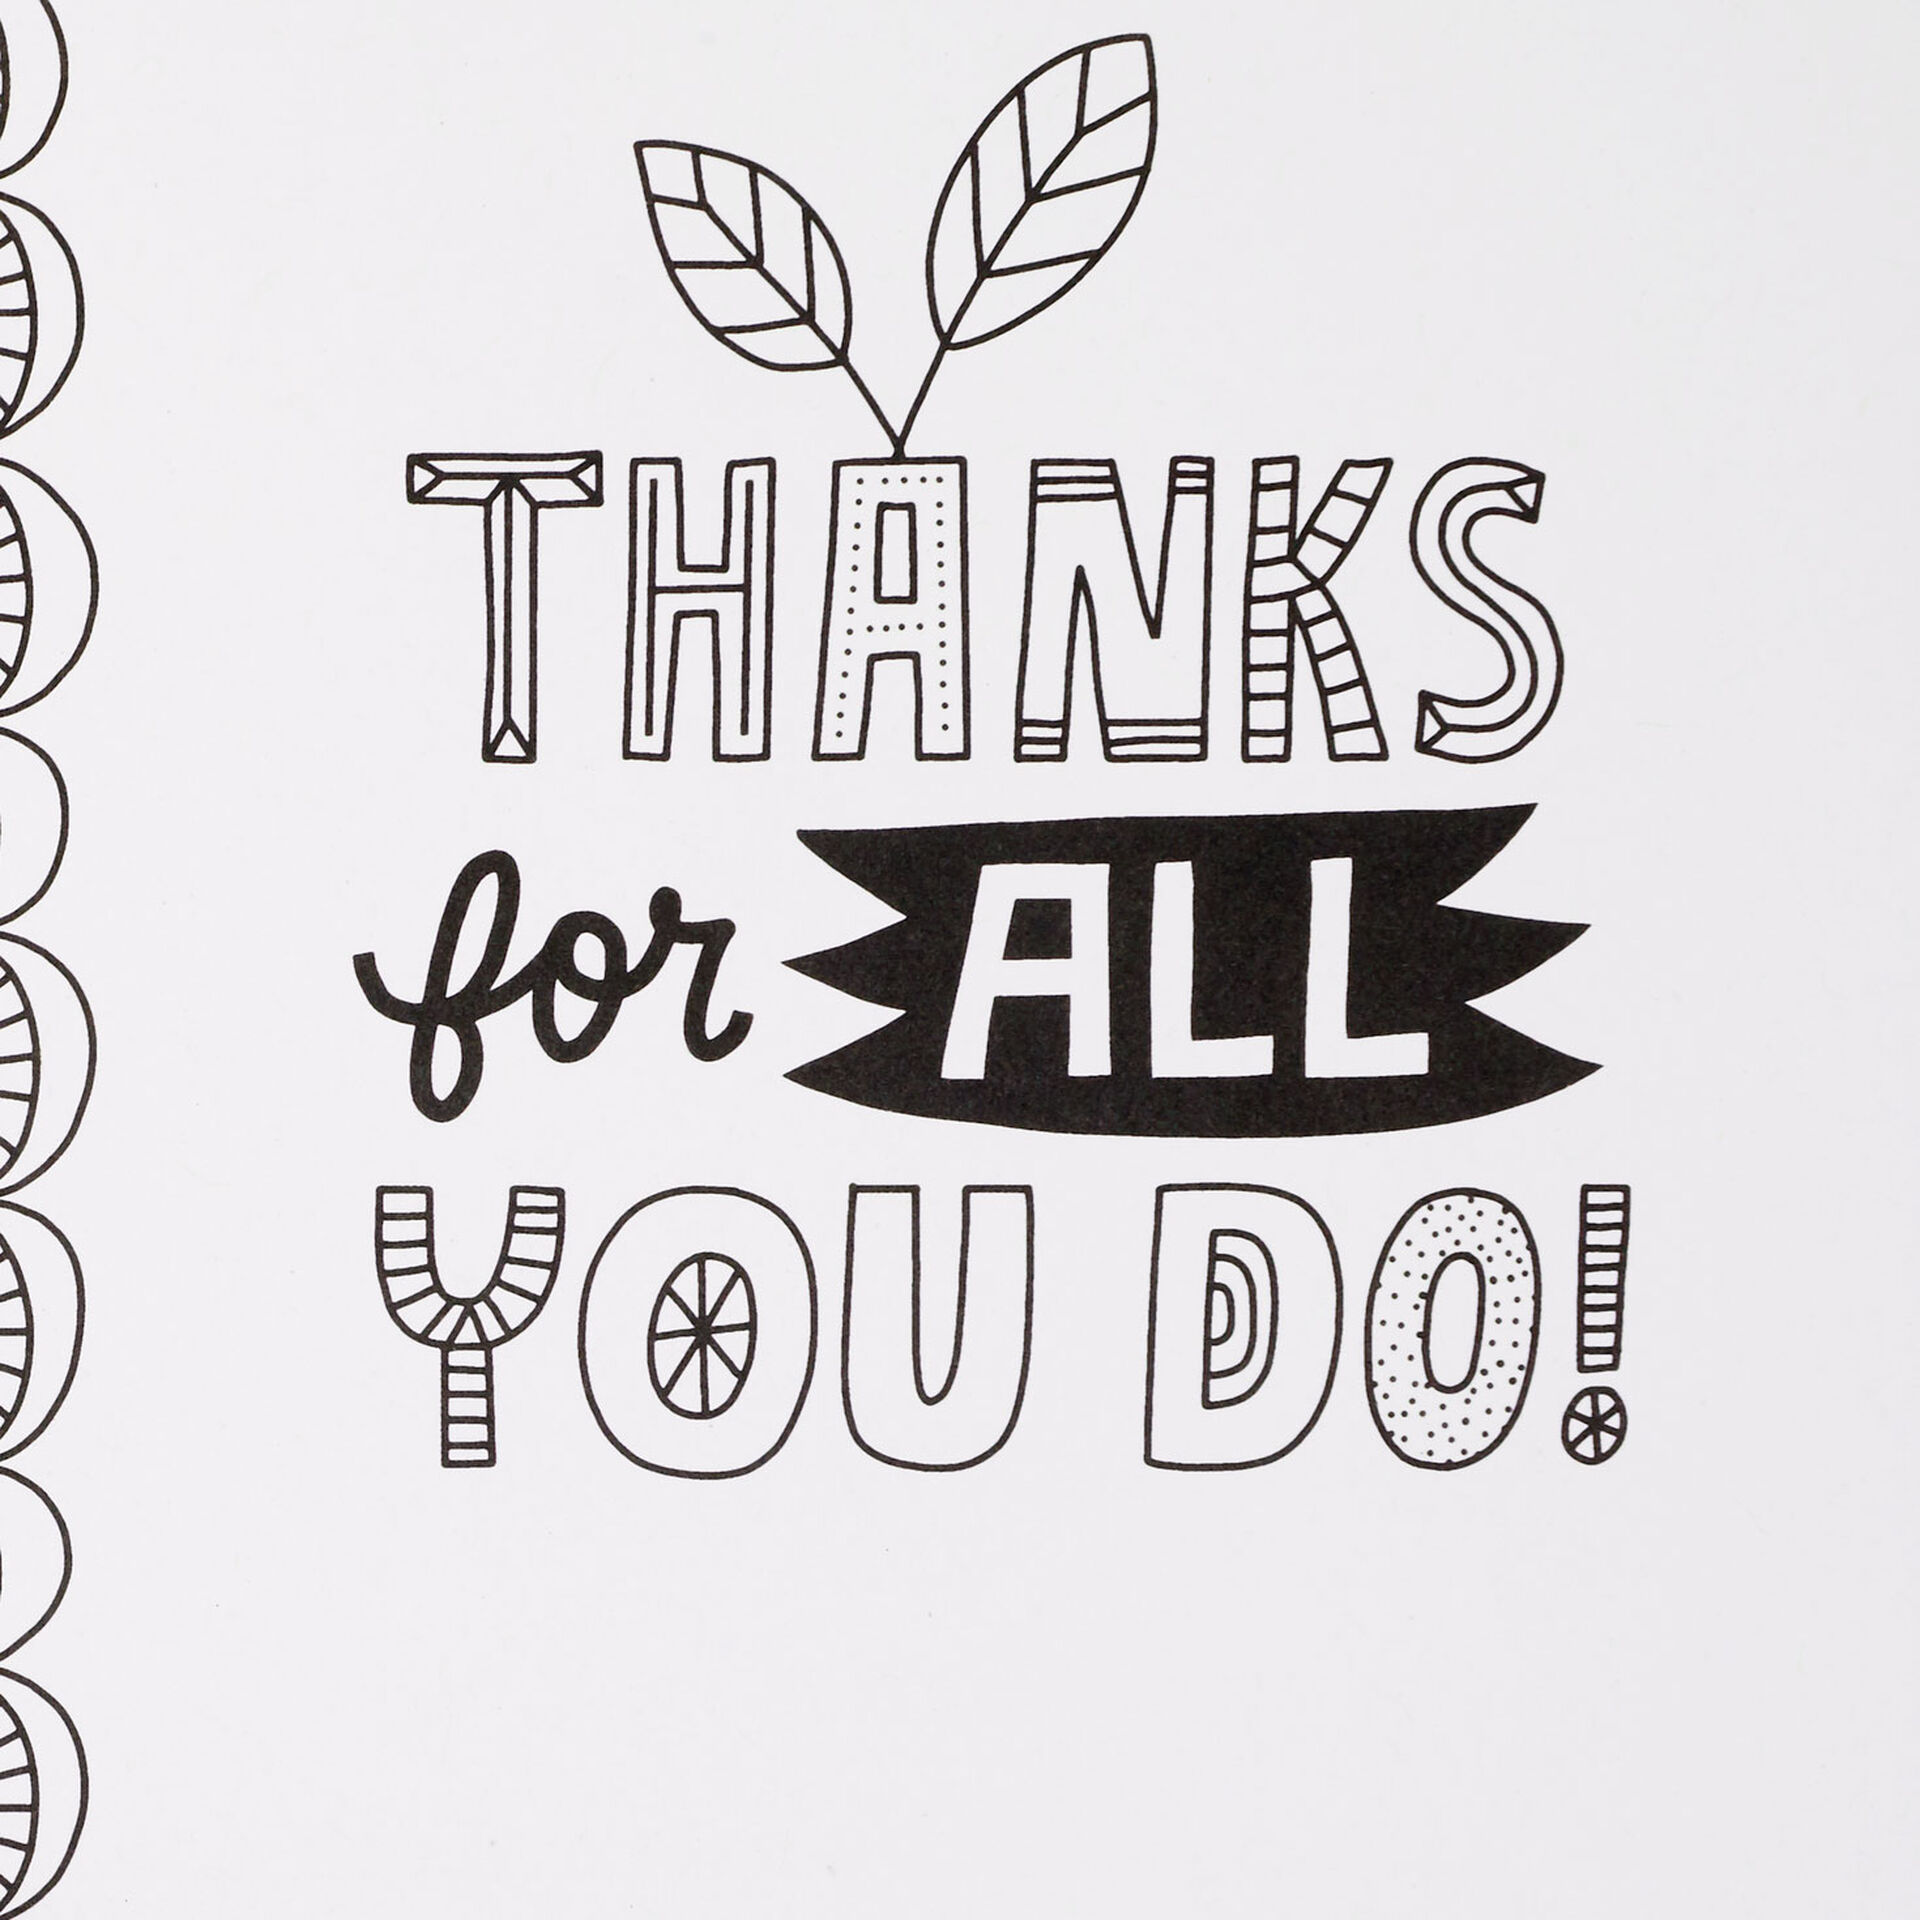 Crayola-Flowers-and-World-ThankYou-Coloring-Card_299FCR2028_02